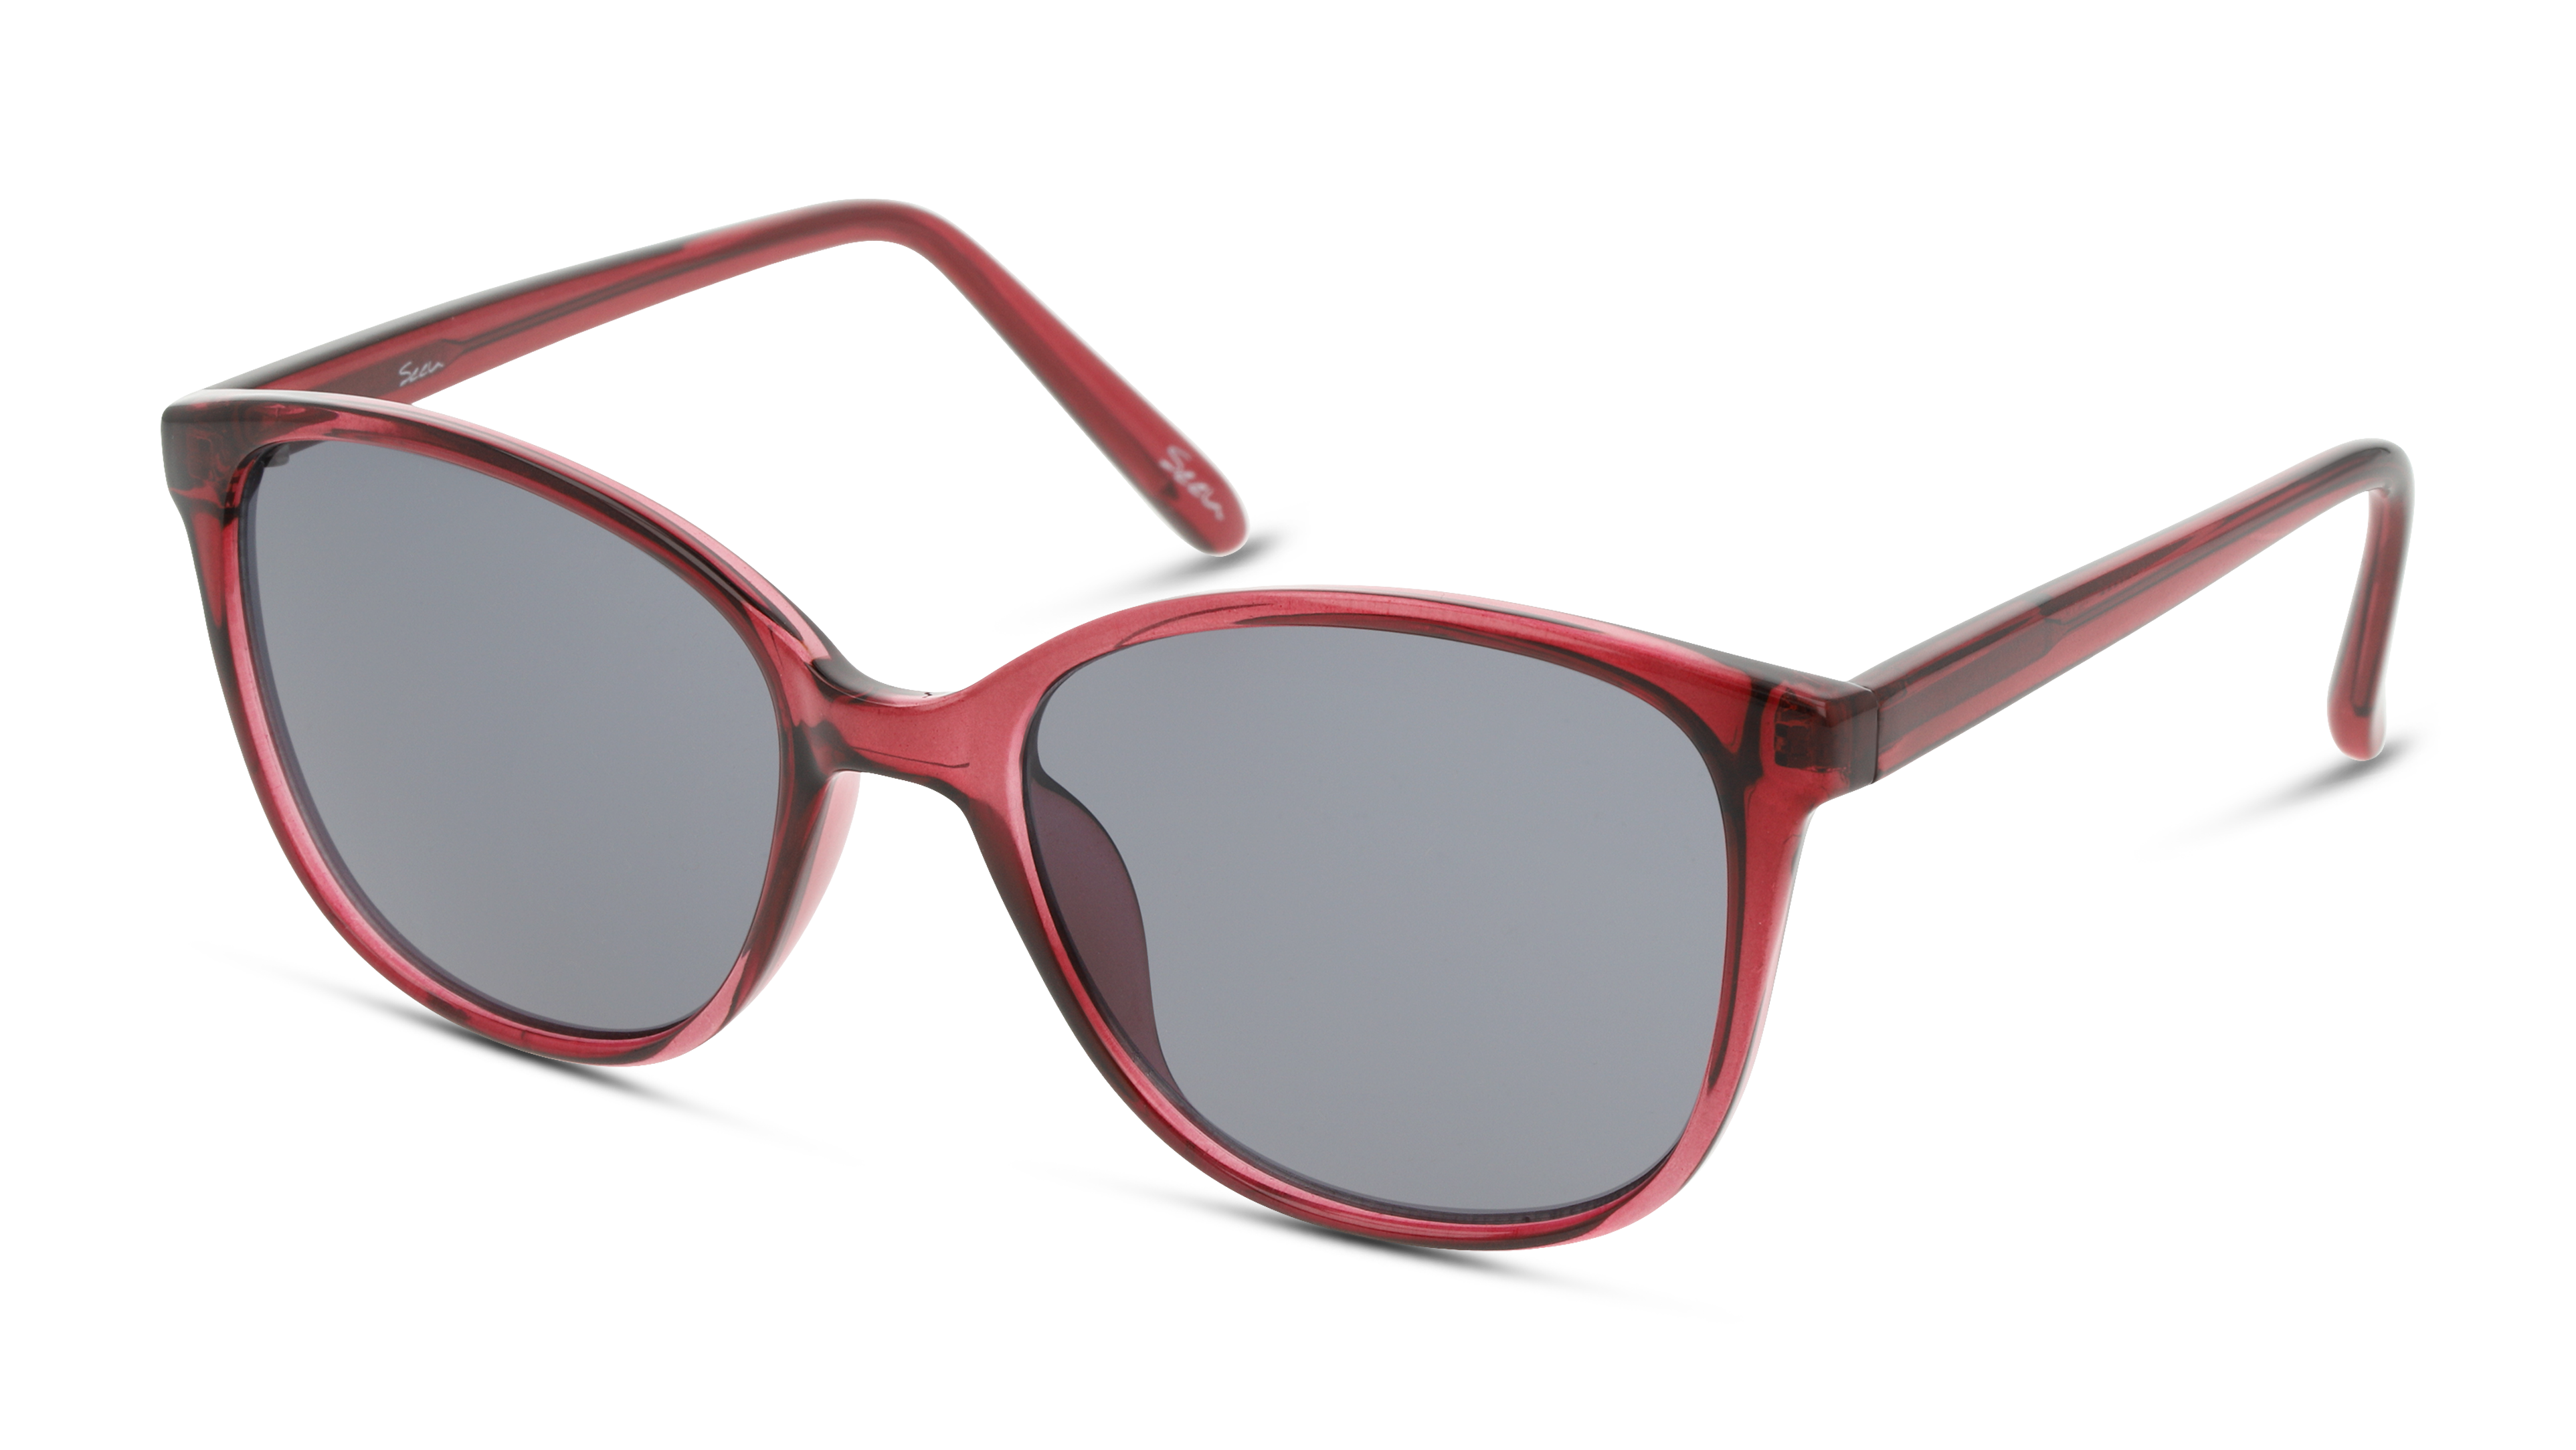 Angle_Left01 Seen SN SF0025 Sunglasses Grey / Transparent, Red